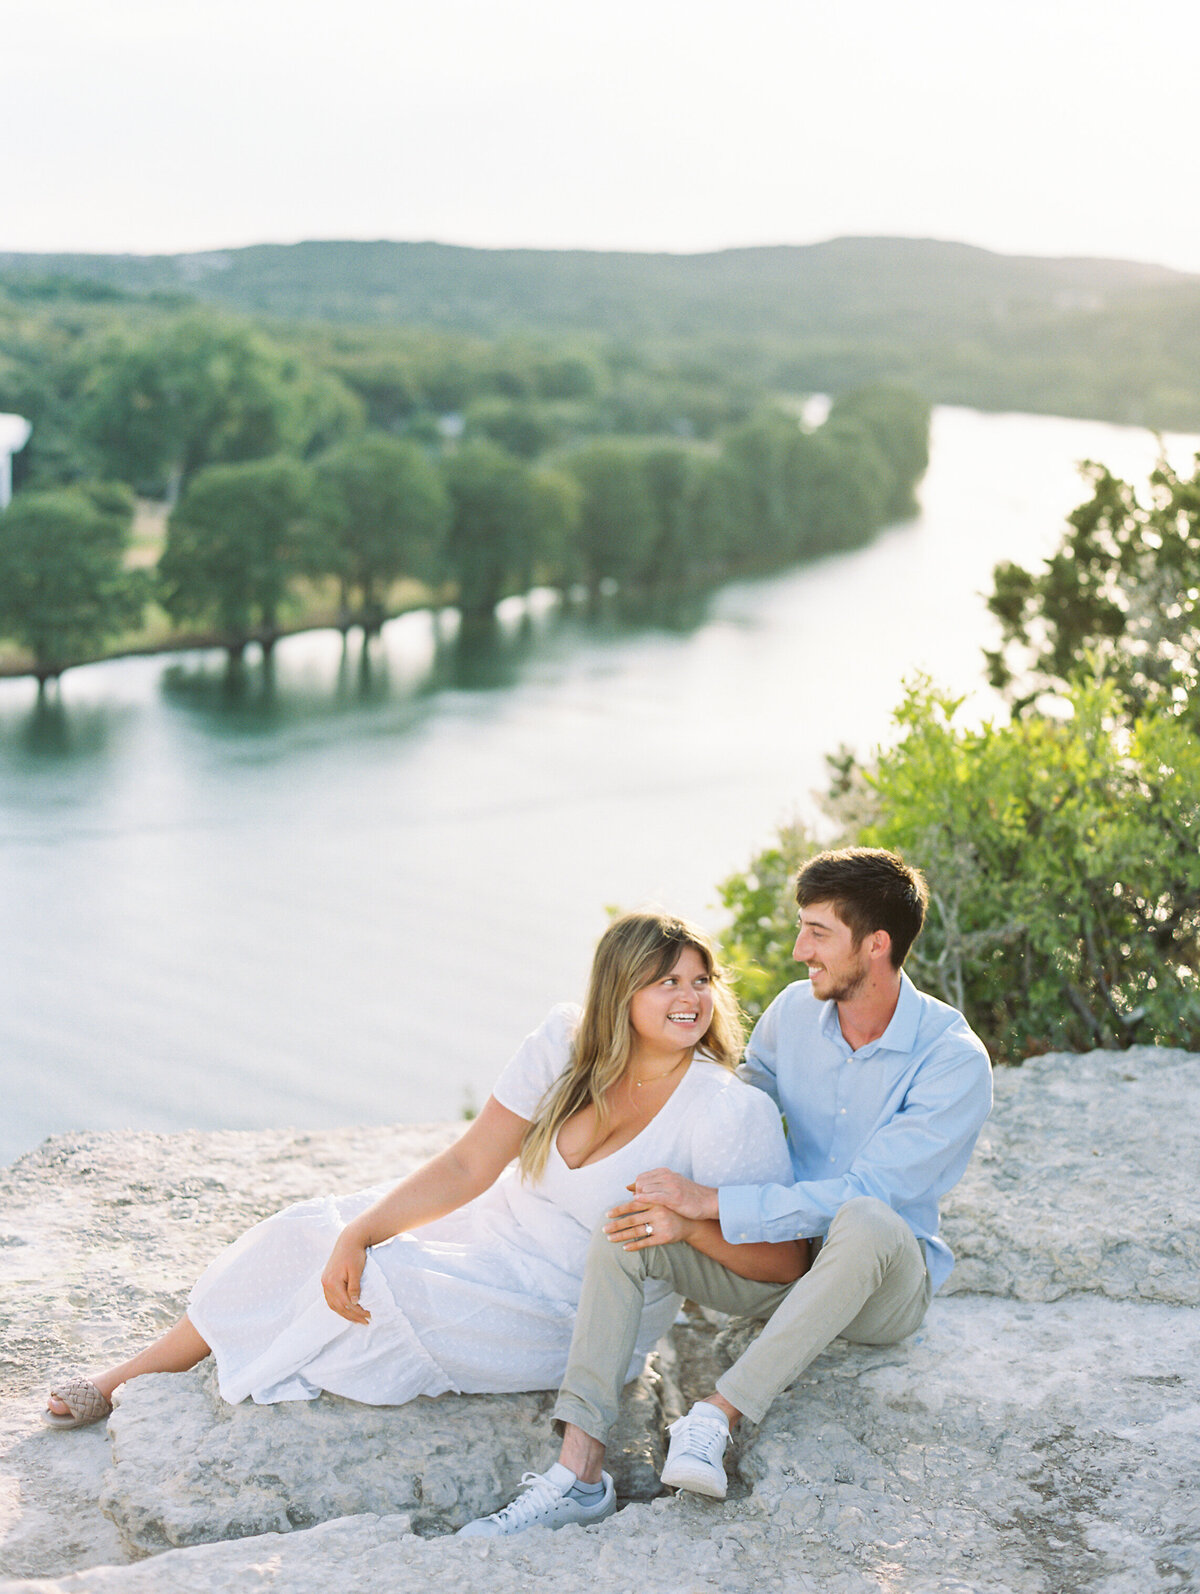 Woman in a white dress and man in a blue shirt posing on a rock in front of a landscape of water and trees